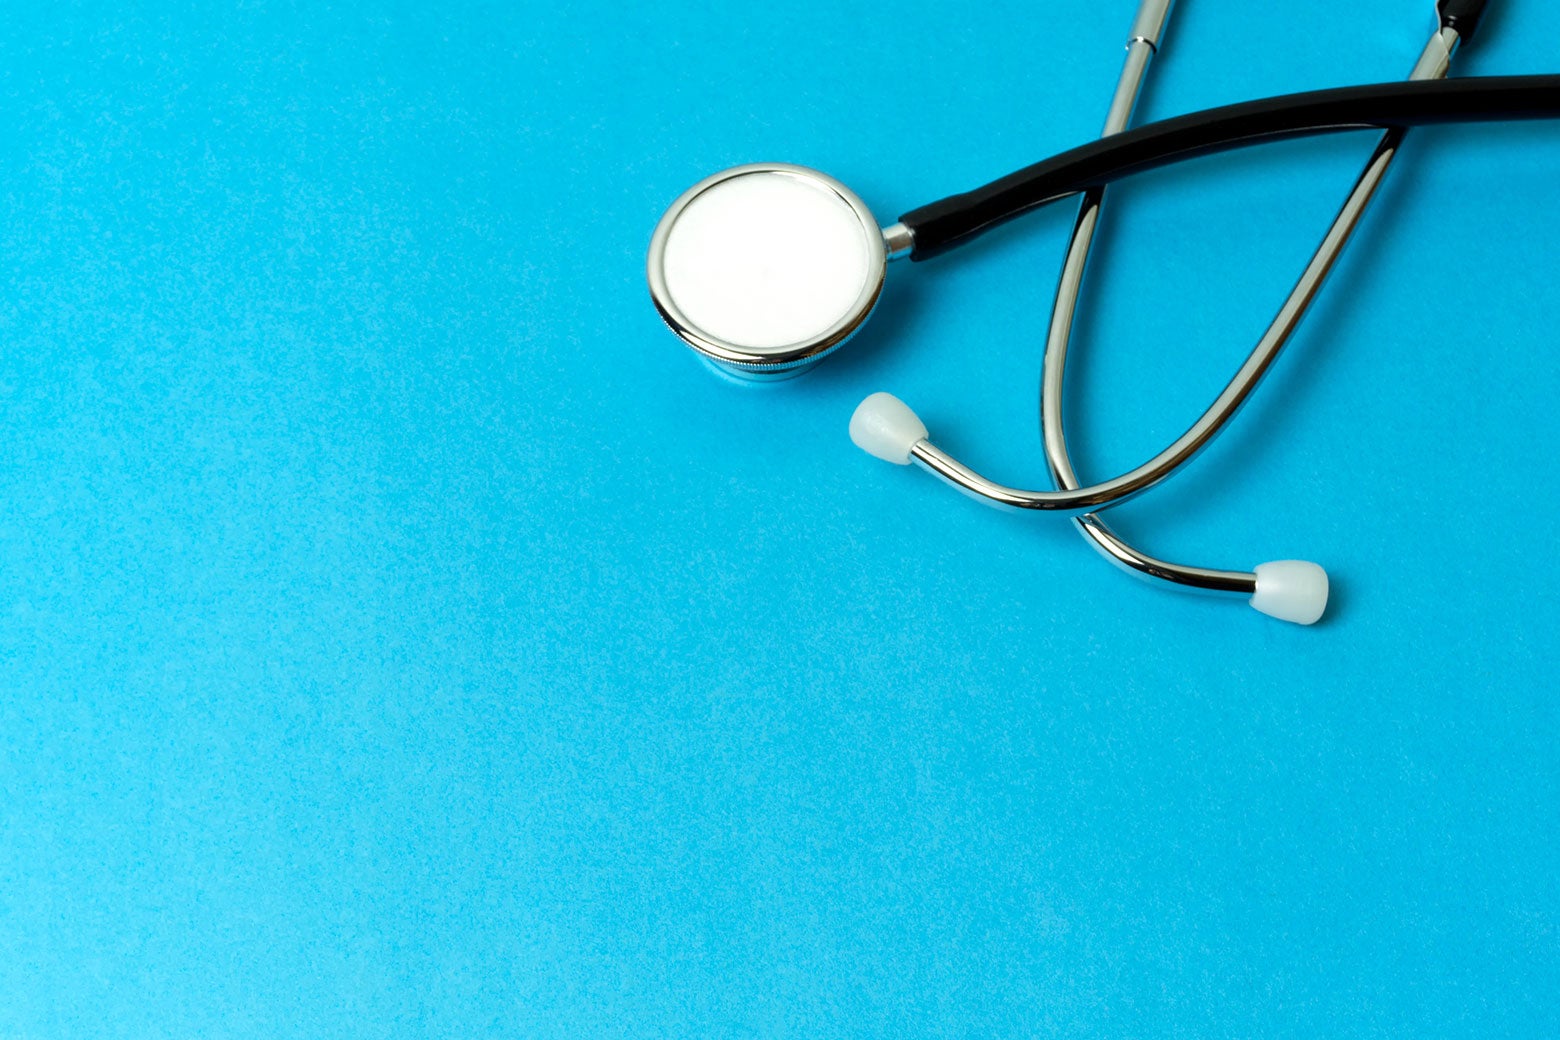 A stethoscope on a solid blue background.